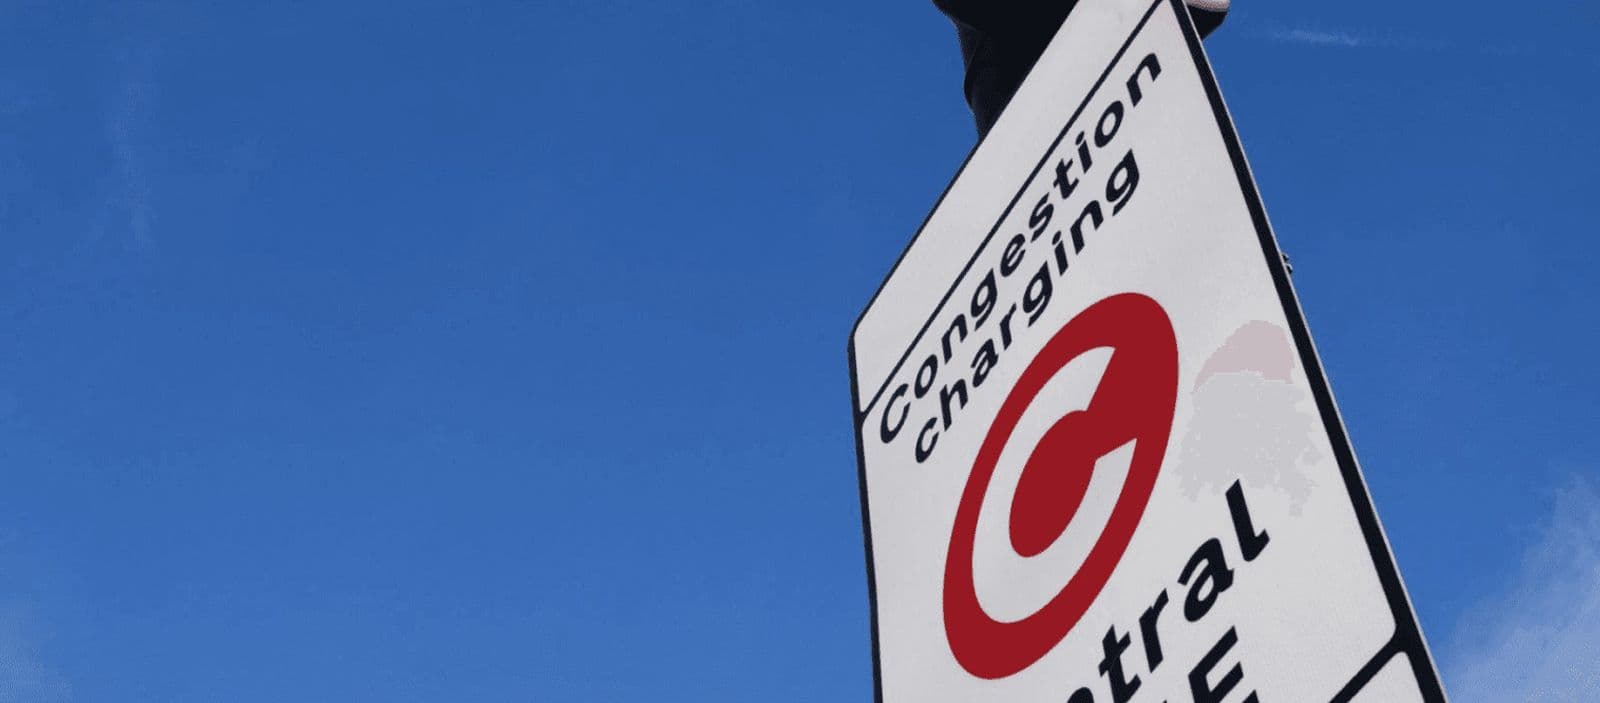 Save £3900 per year from Congestion Charge